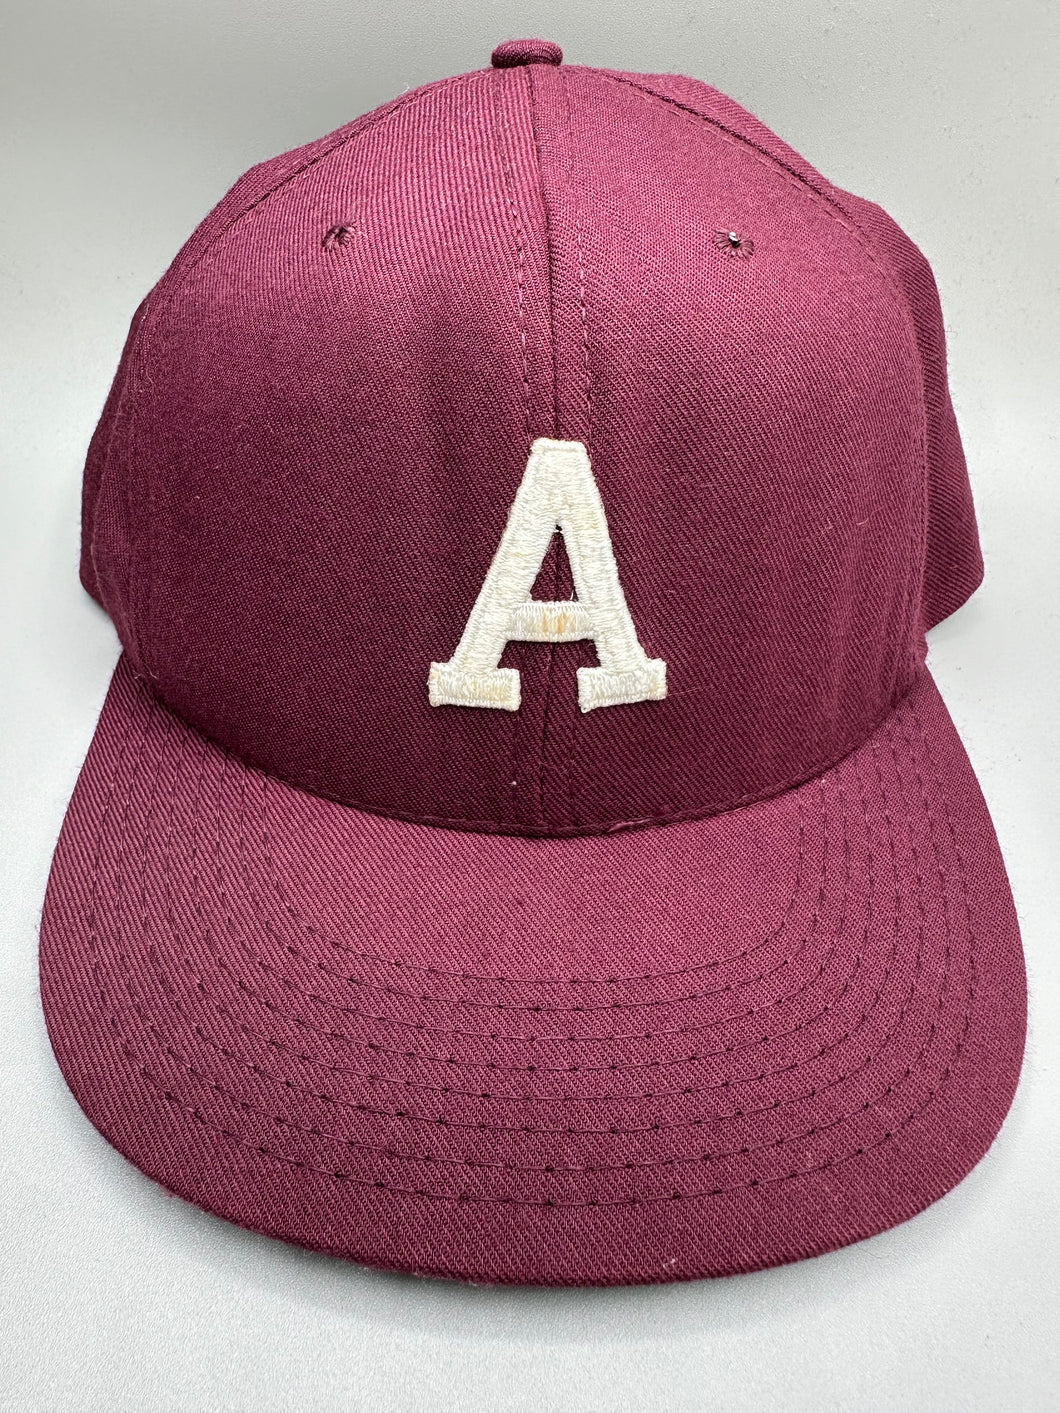 Vintage Alabama A Made in USA Fitted Hat 7 3/8